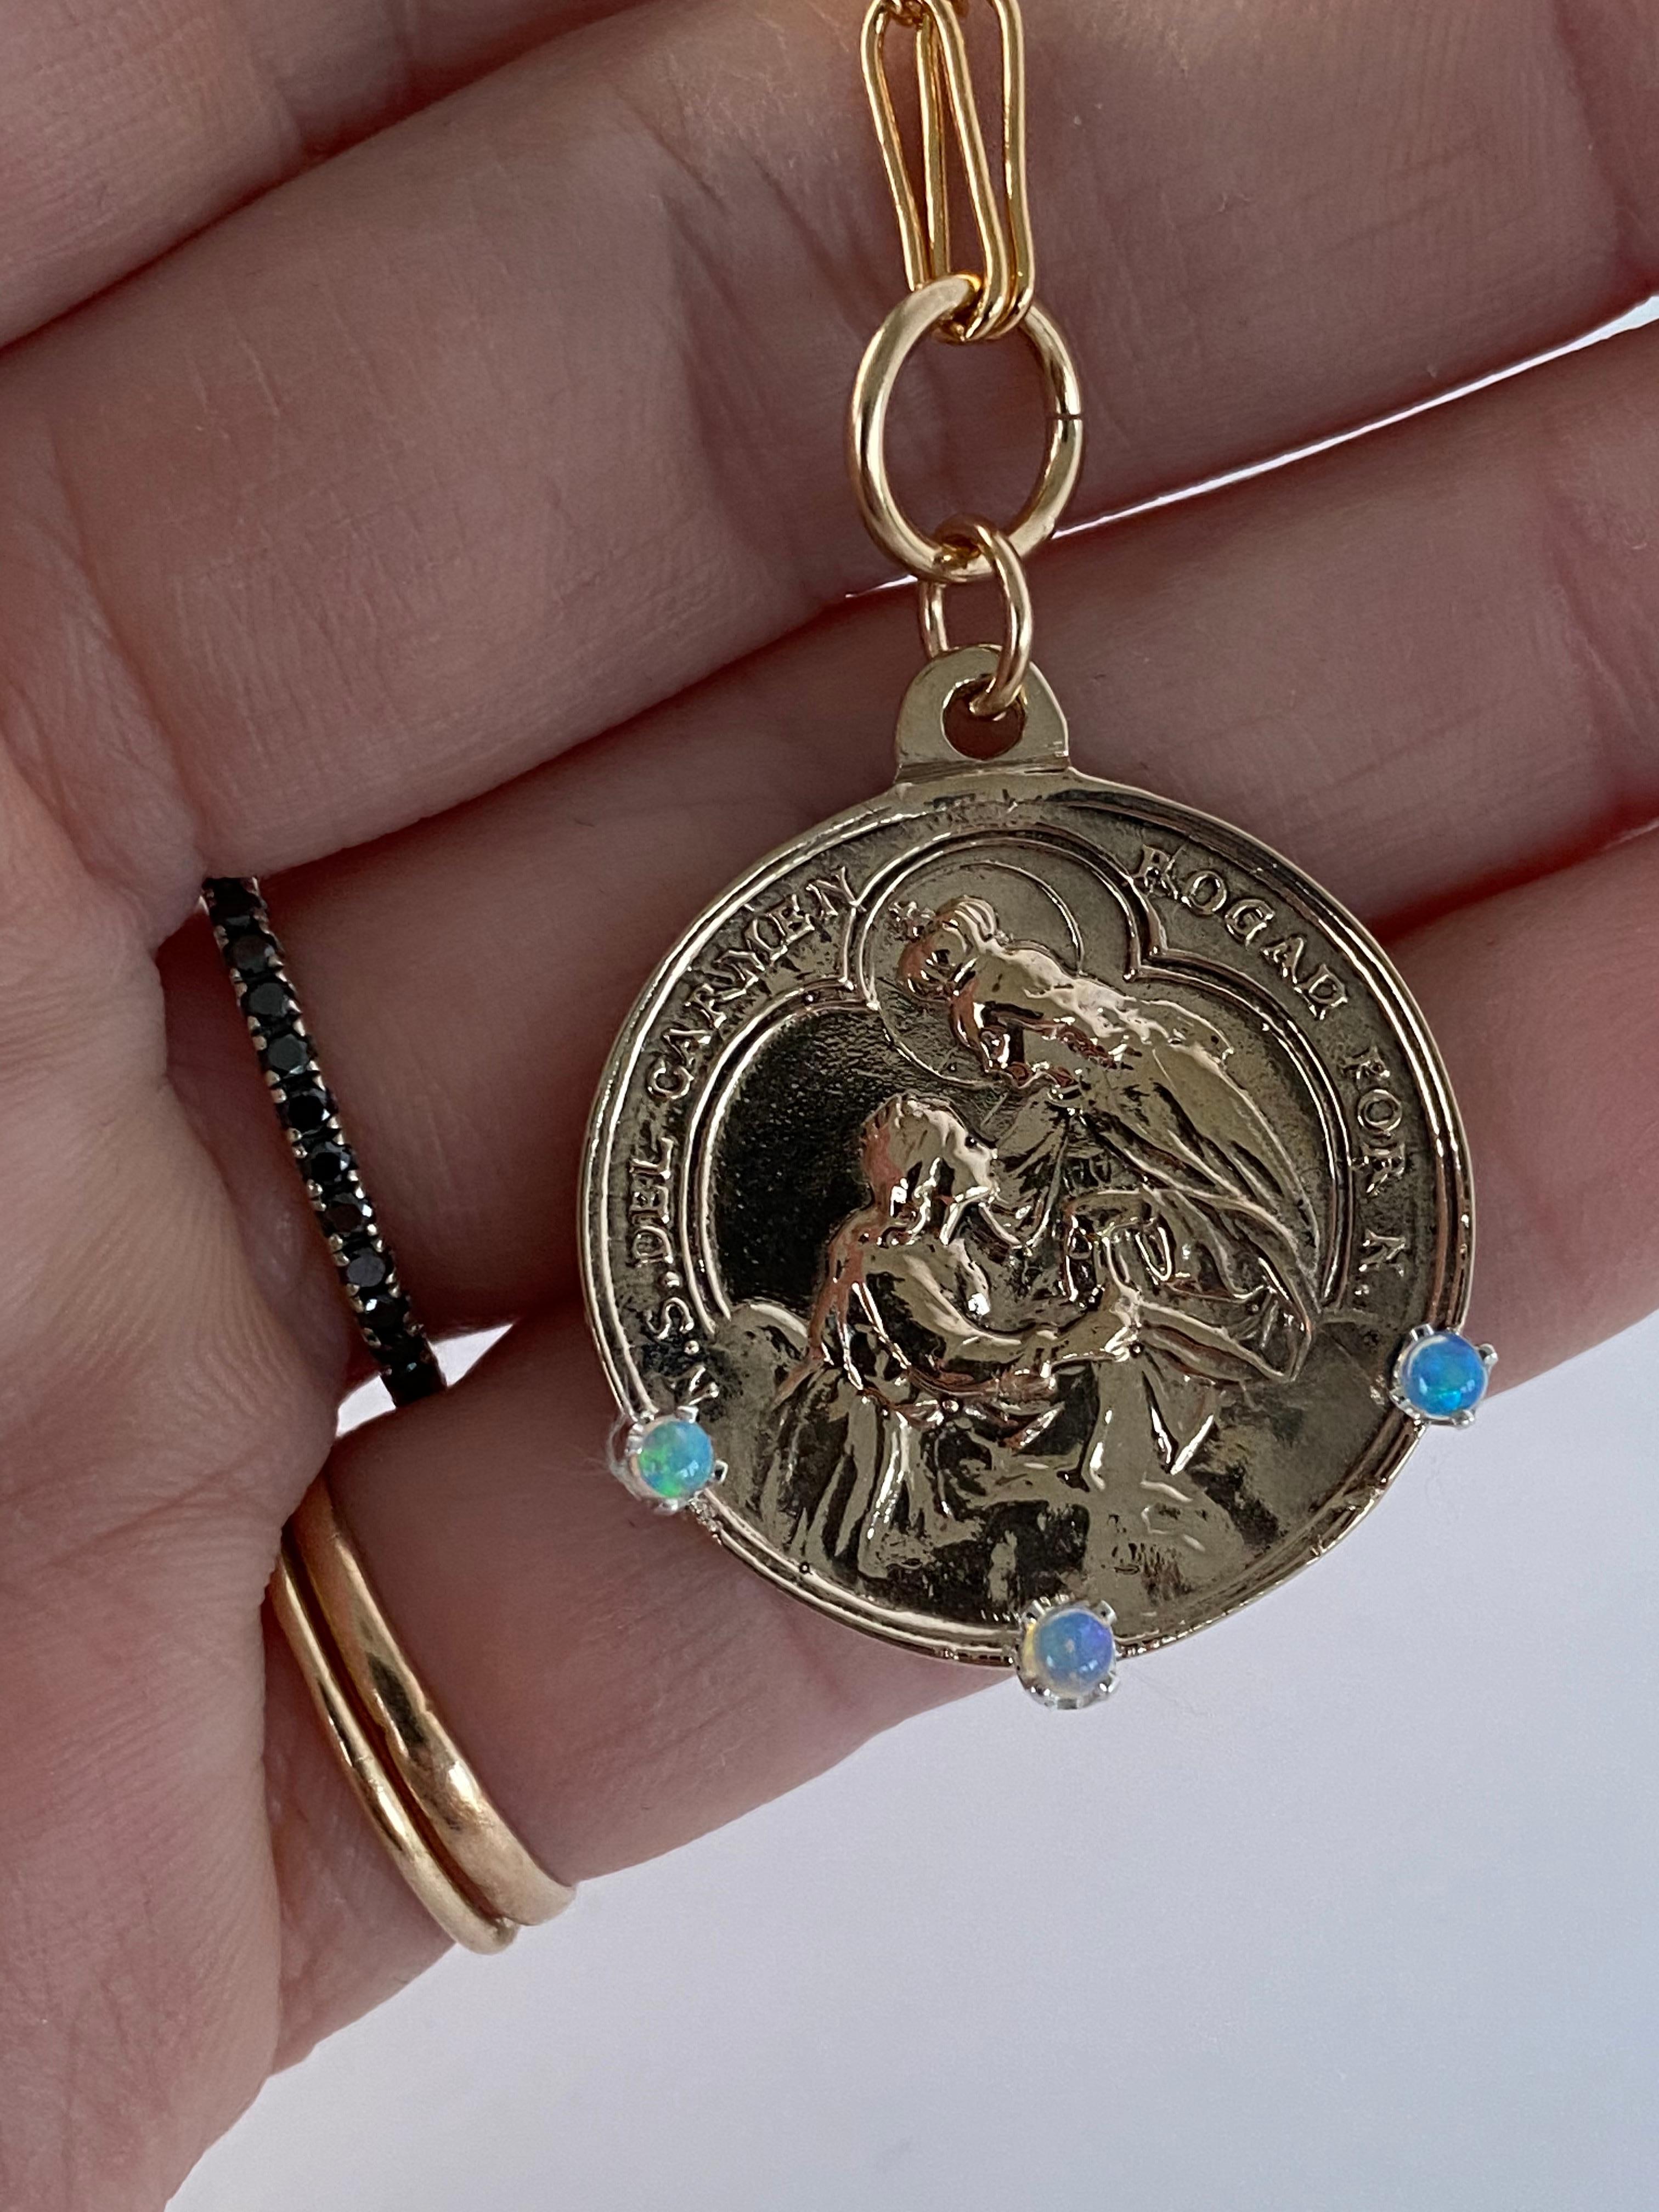 Medal Long Chain Necklace Saint Virgin Mary Opal Pendant J Dauphin


Symbols or medals can become a powerful tool in our arsenal for the spiritual. 
Since ancient times spiritual pendants, religious medals has been used to protect us. During